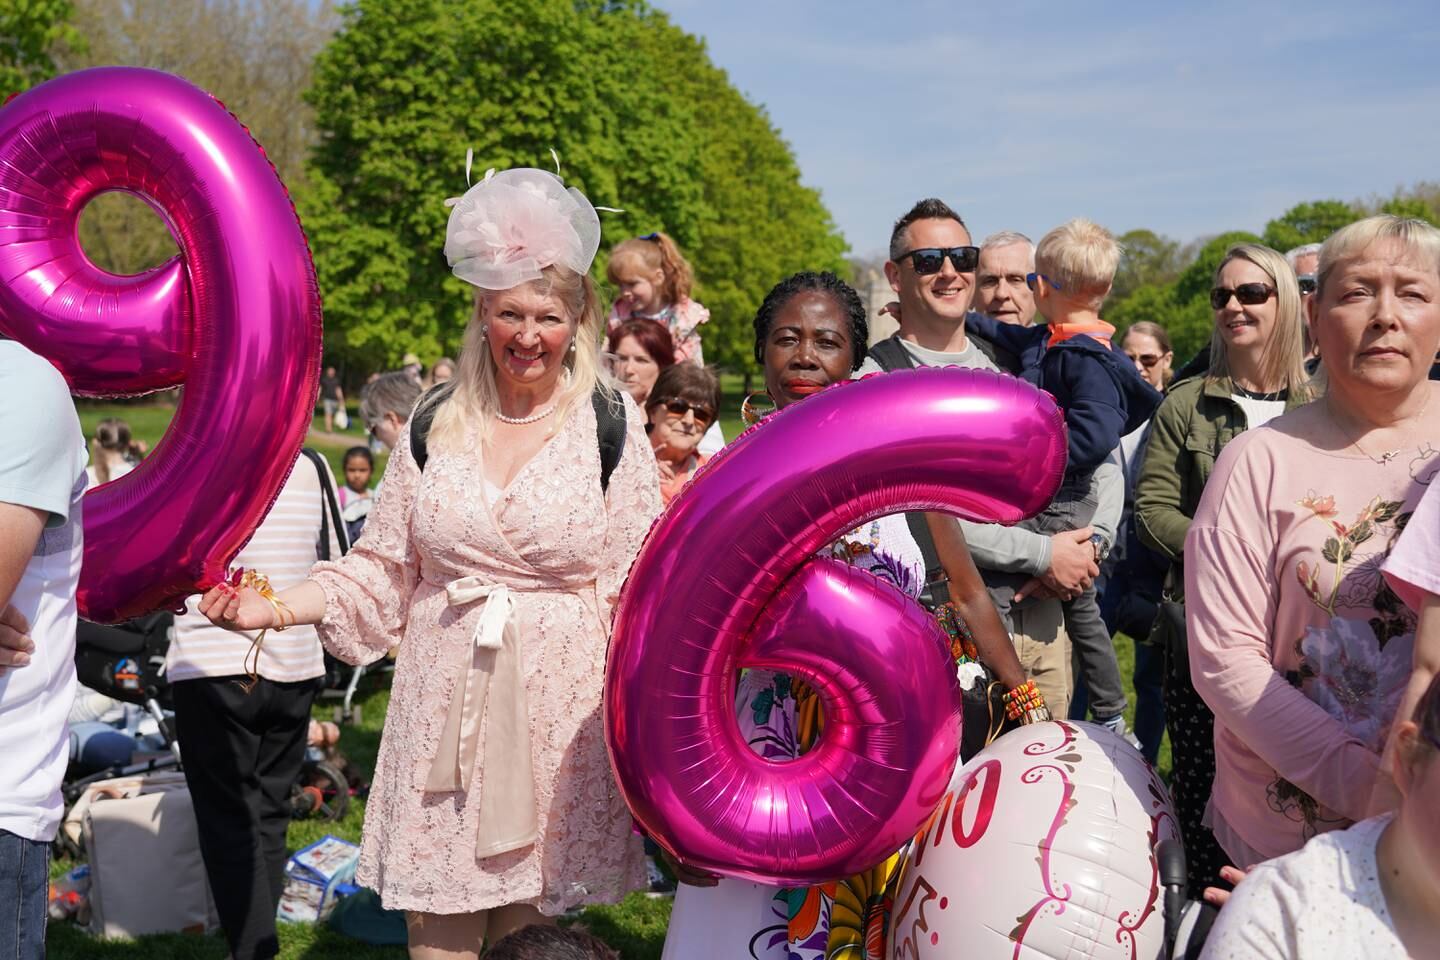 Royal fans Anne Daly, left, and Grace Gothard, right, hold balloons to celebrate the queen's 96th birthday at an event in Windsor. Victoria Pertusa / The National